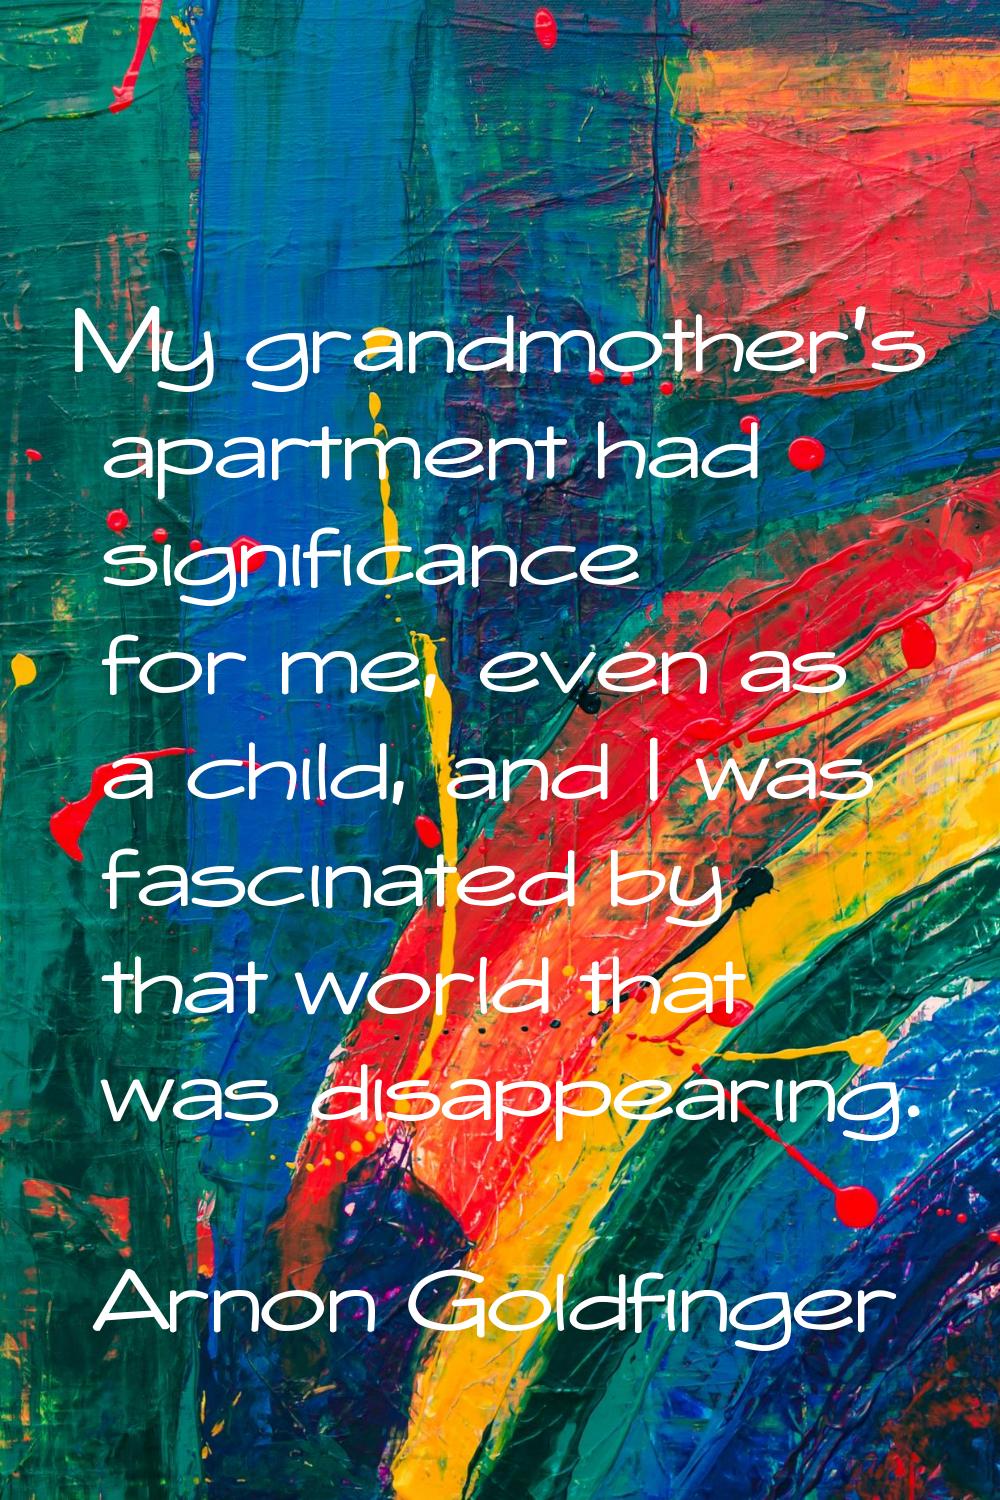 My grandmother's apartment had significance for me, even as a child, and I was fascinated by that w